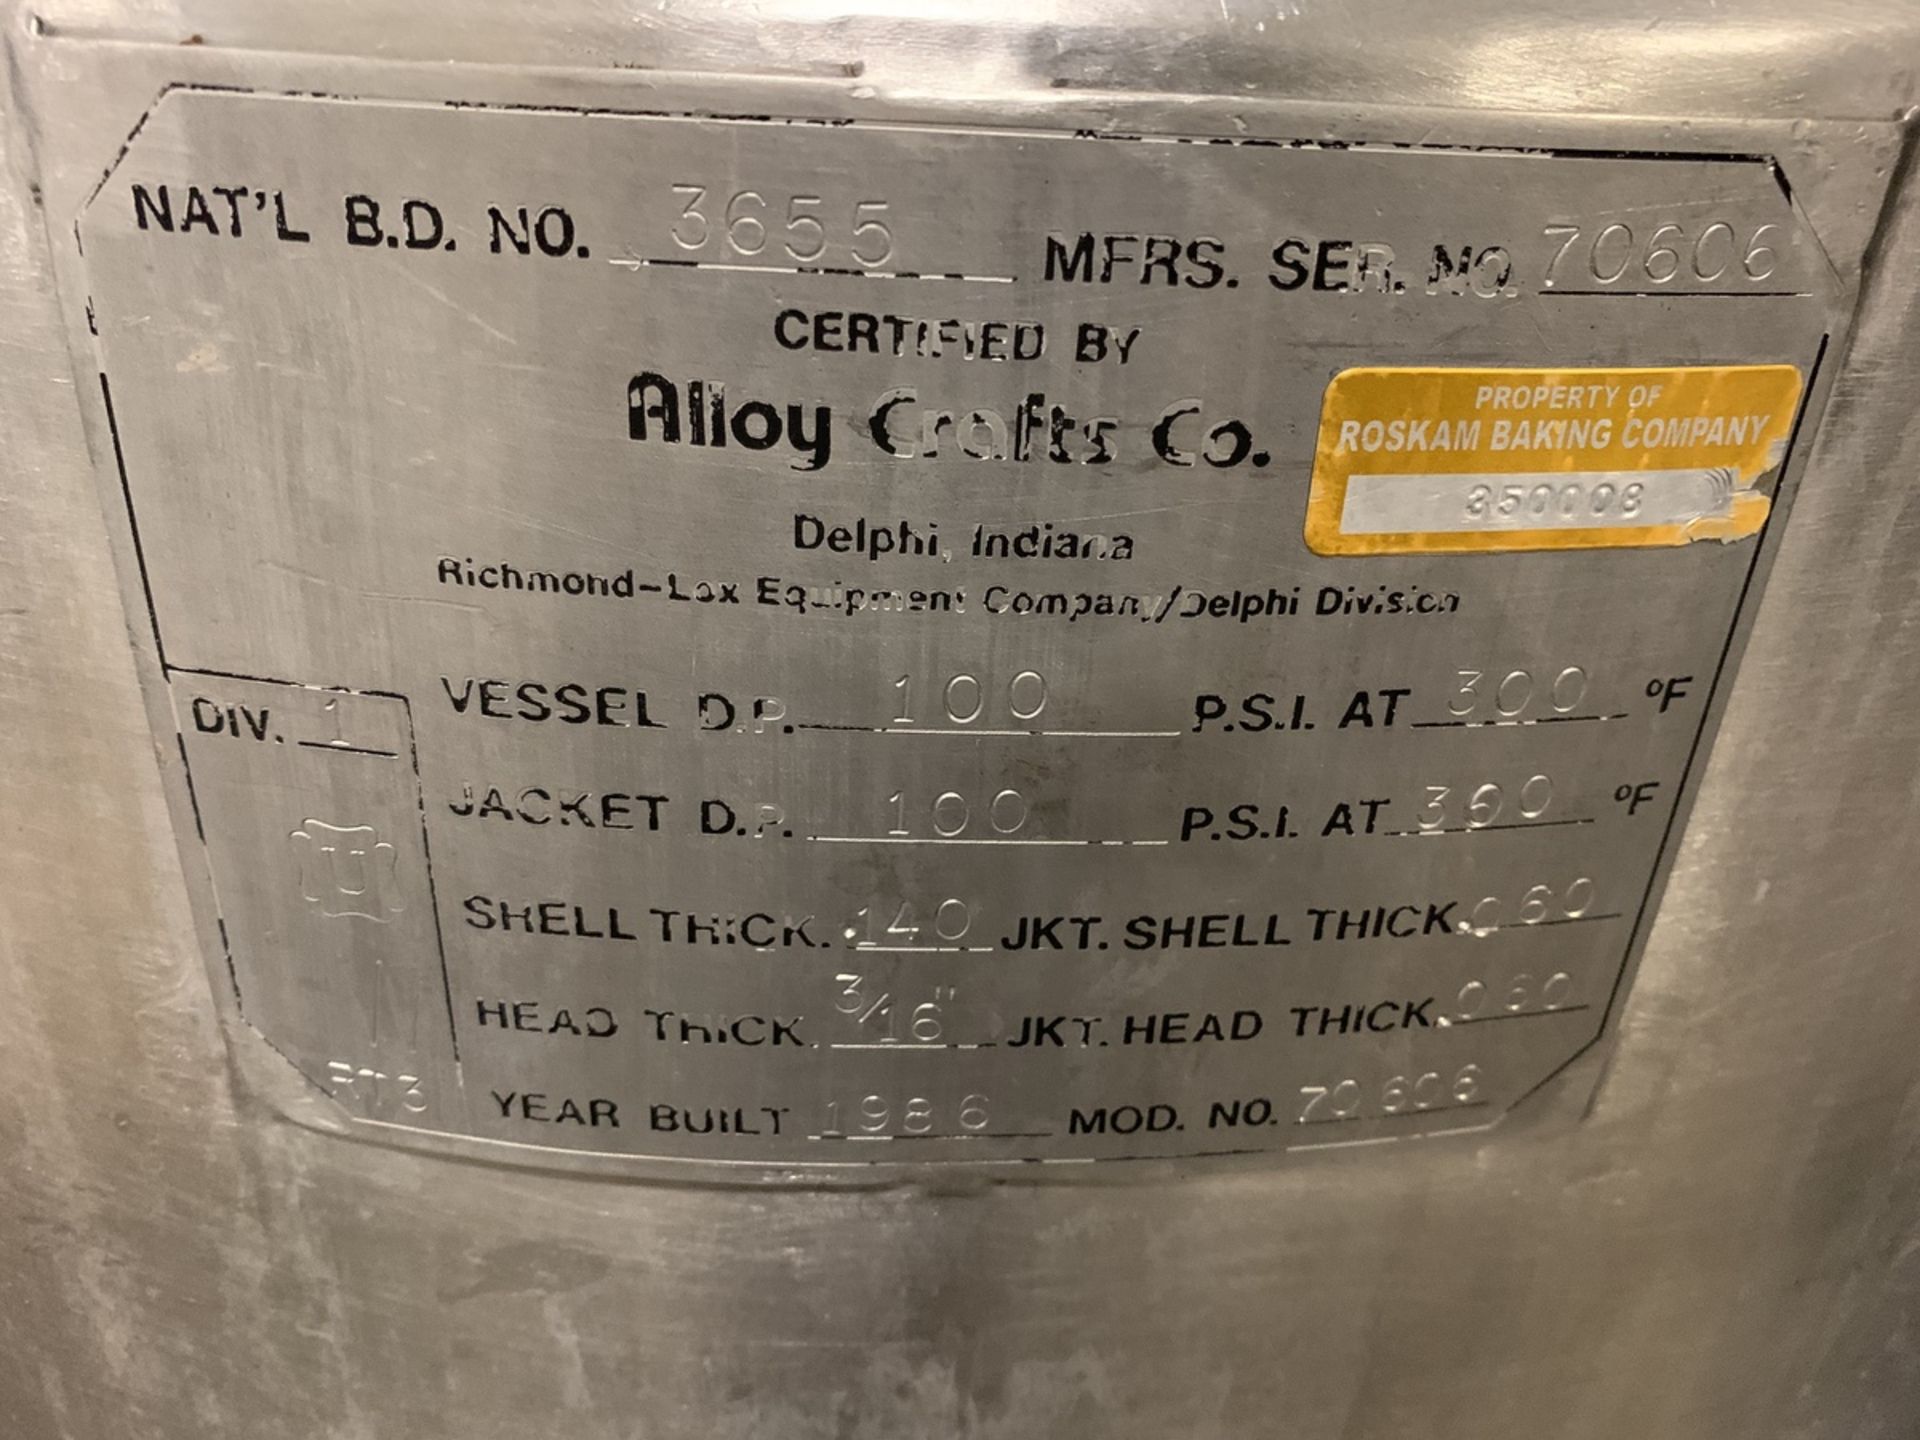 Stainless Steel Jacketed Agitated Pressure Vessel, Vertical 3-Blade Prop Agitation, | Rig Fee: 100 - Image 3 of 3